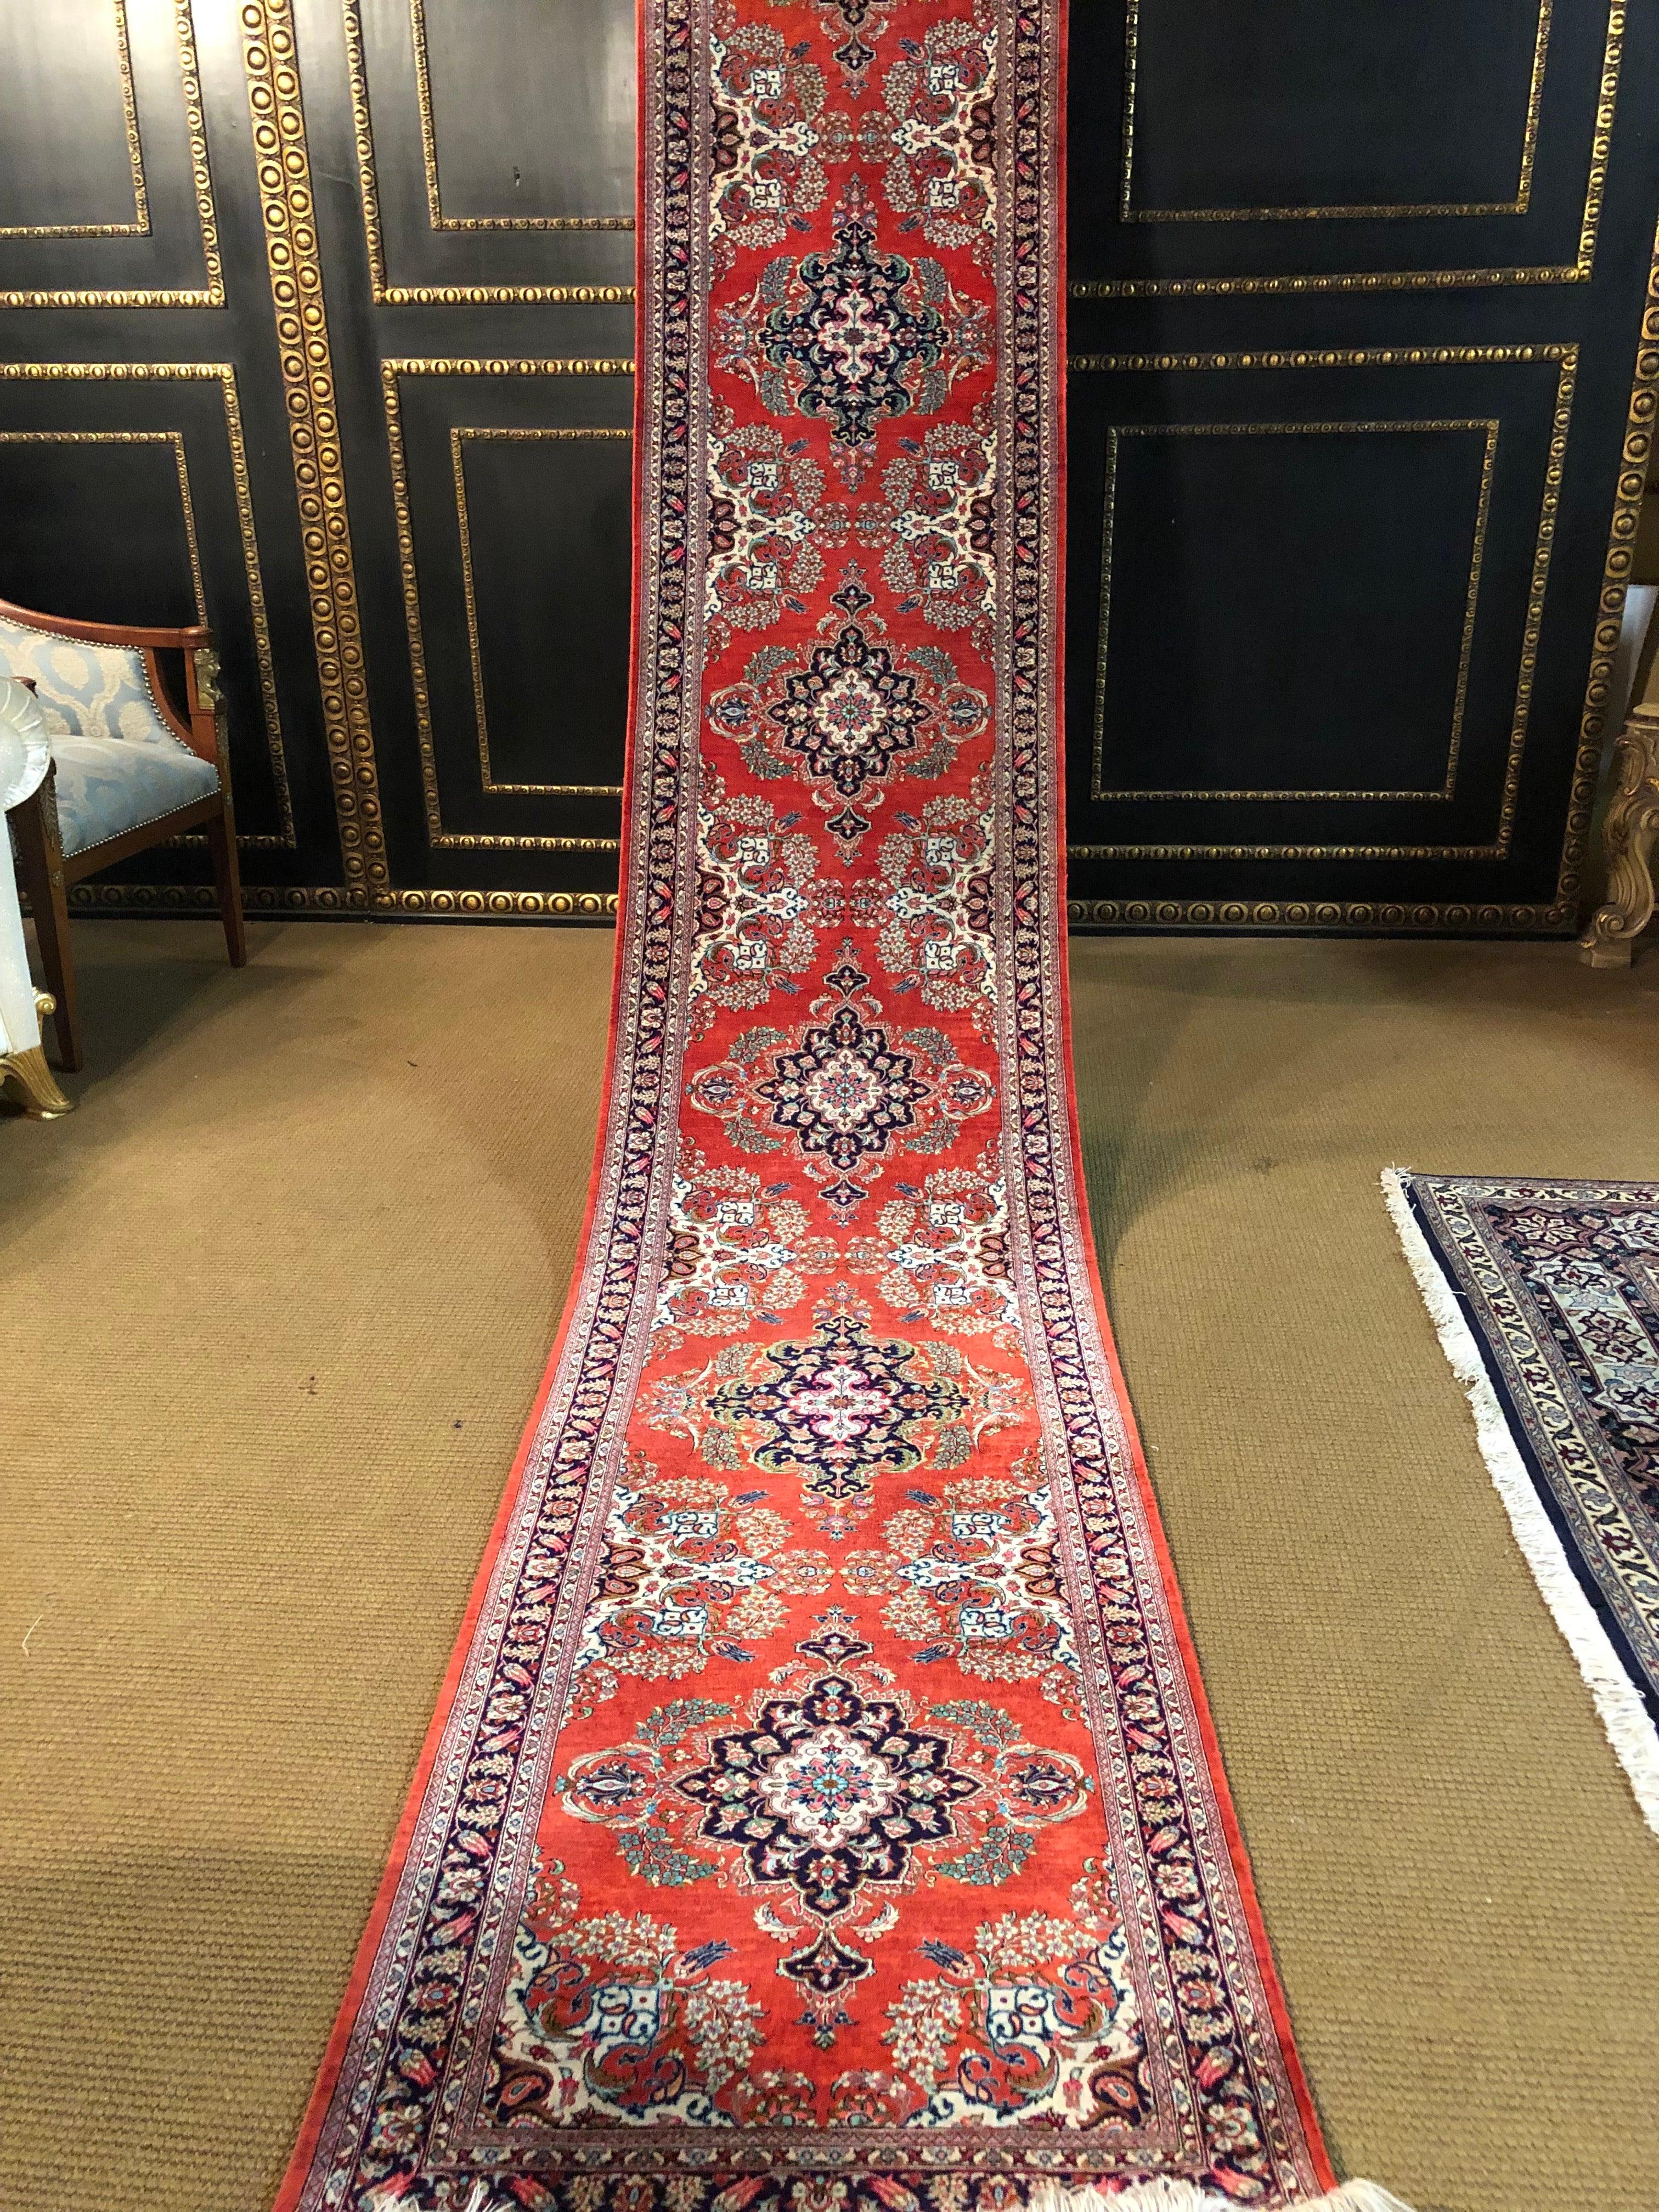 Finest quality Ghom silk carpet
with invoice and certificate.

Measures: 
Length 400cm
Width 69cm
in a top condition and beautiful color.
The carpet was bought at Nobel warehouse KaDeDeWe.
Original price was 9950DM
Berlin, 14.9.1993.